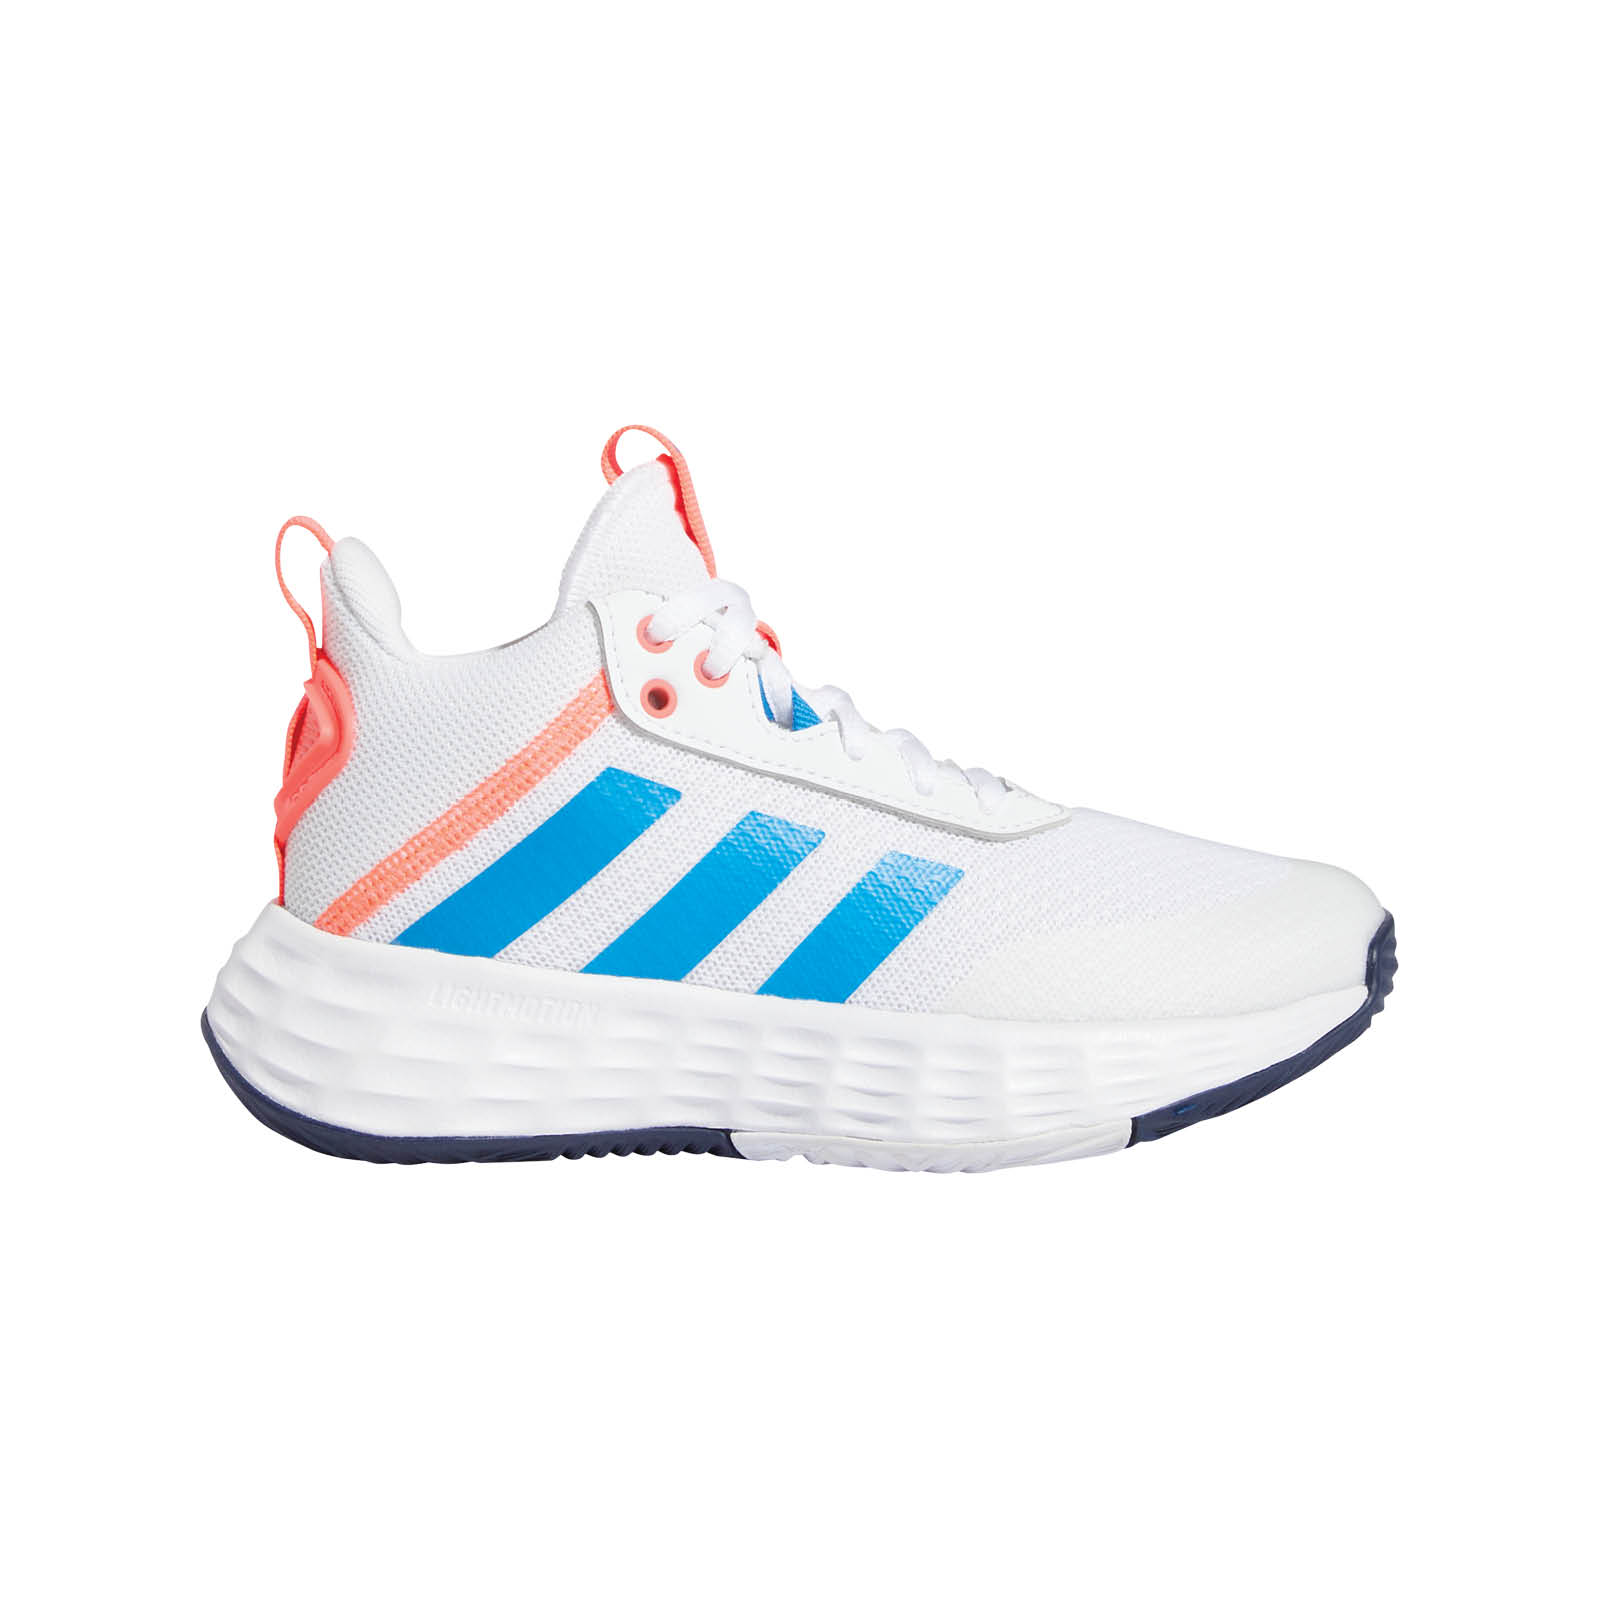 adidas - OWNTHEGAME 2.0 K - FTWR WHITE/BLUE RUSH/ Παιδικά > Παπούτσια > Αθλητικά > Παπούτσι Low Cut